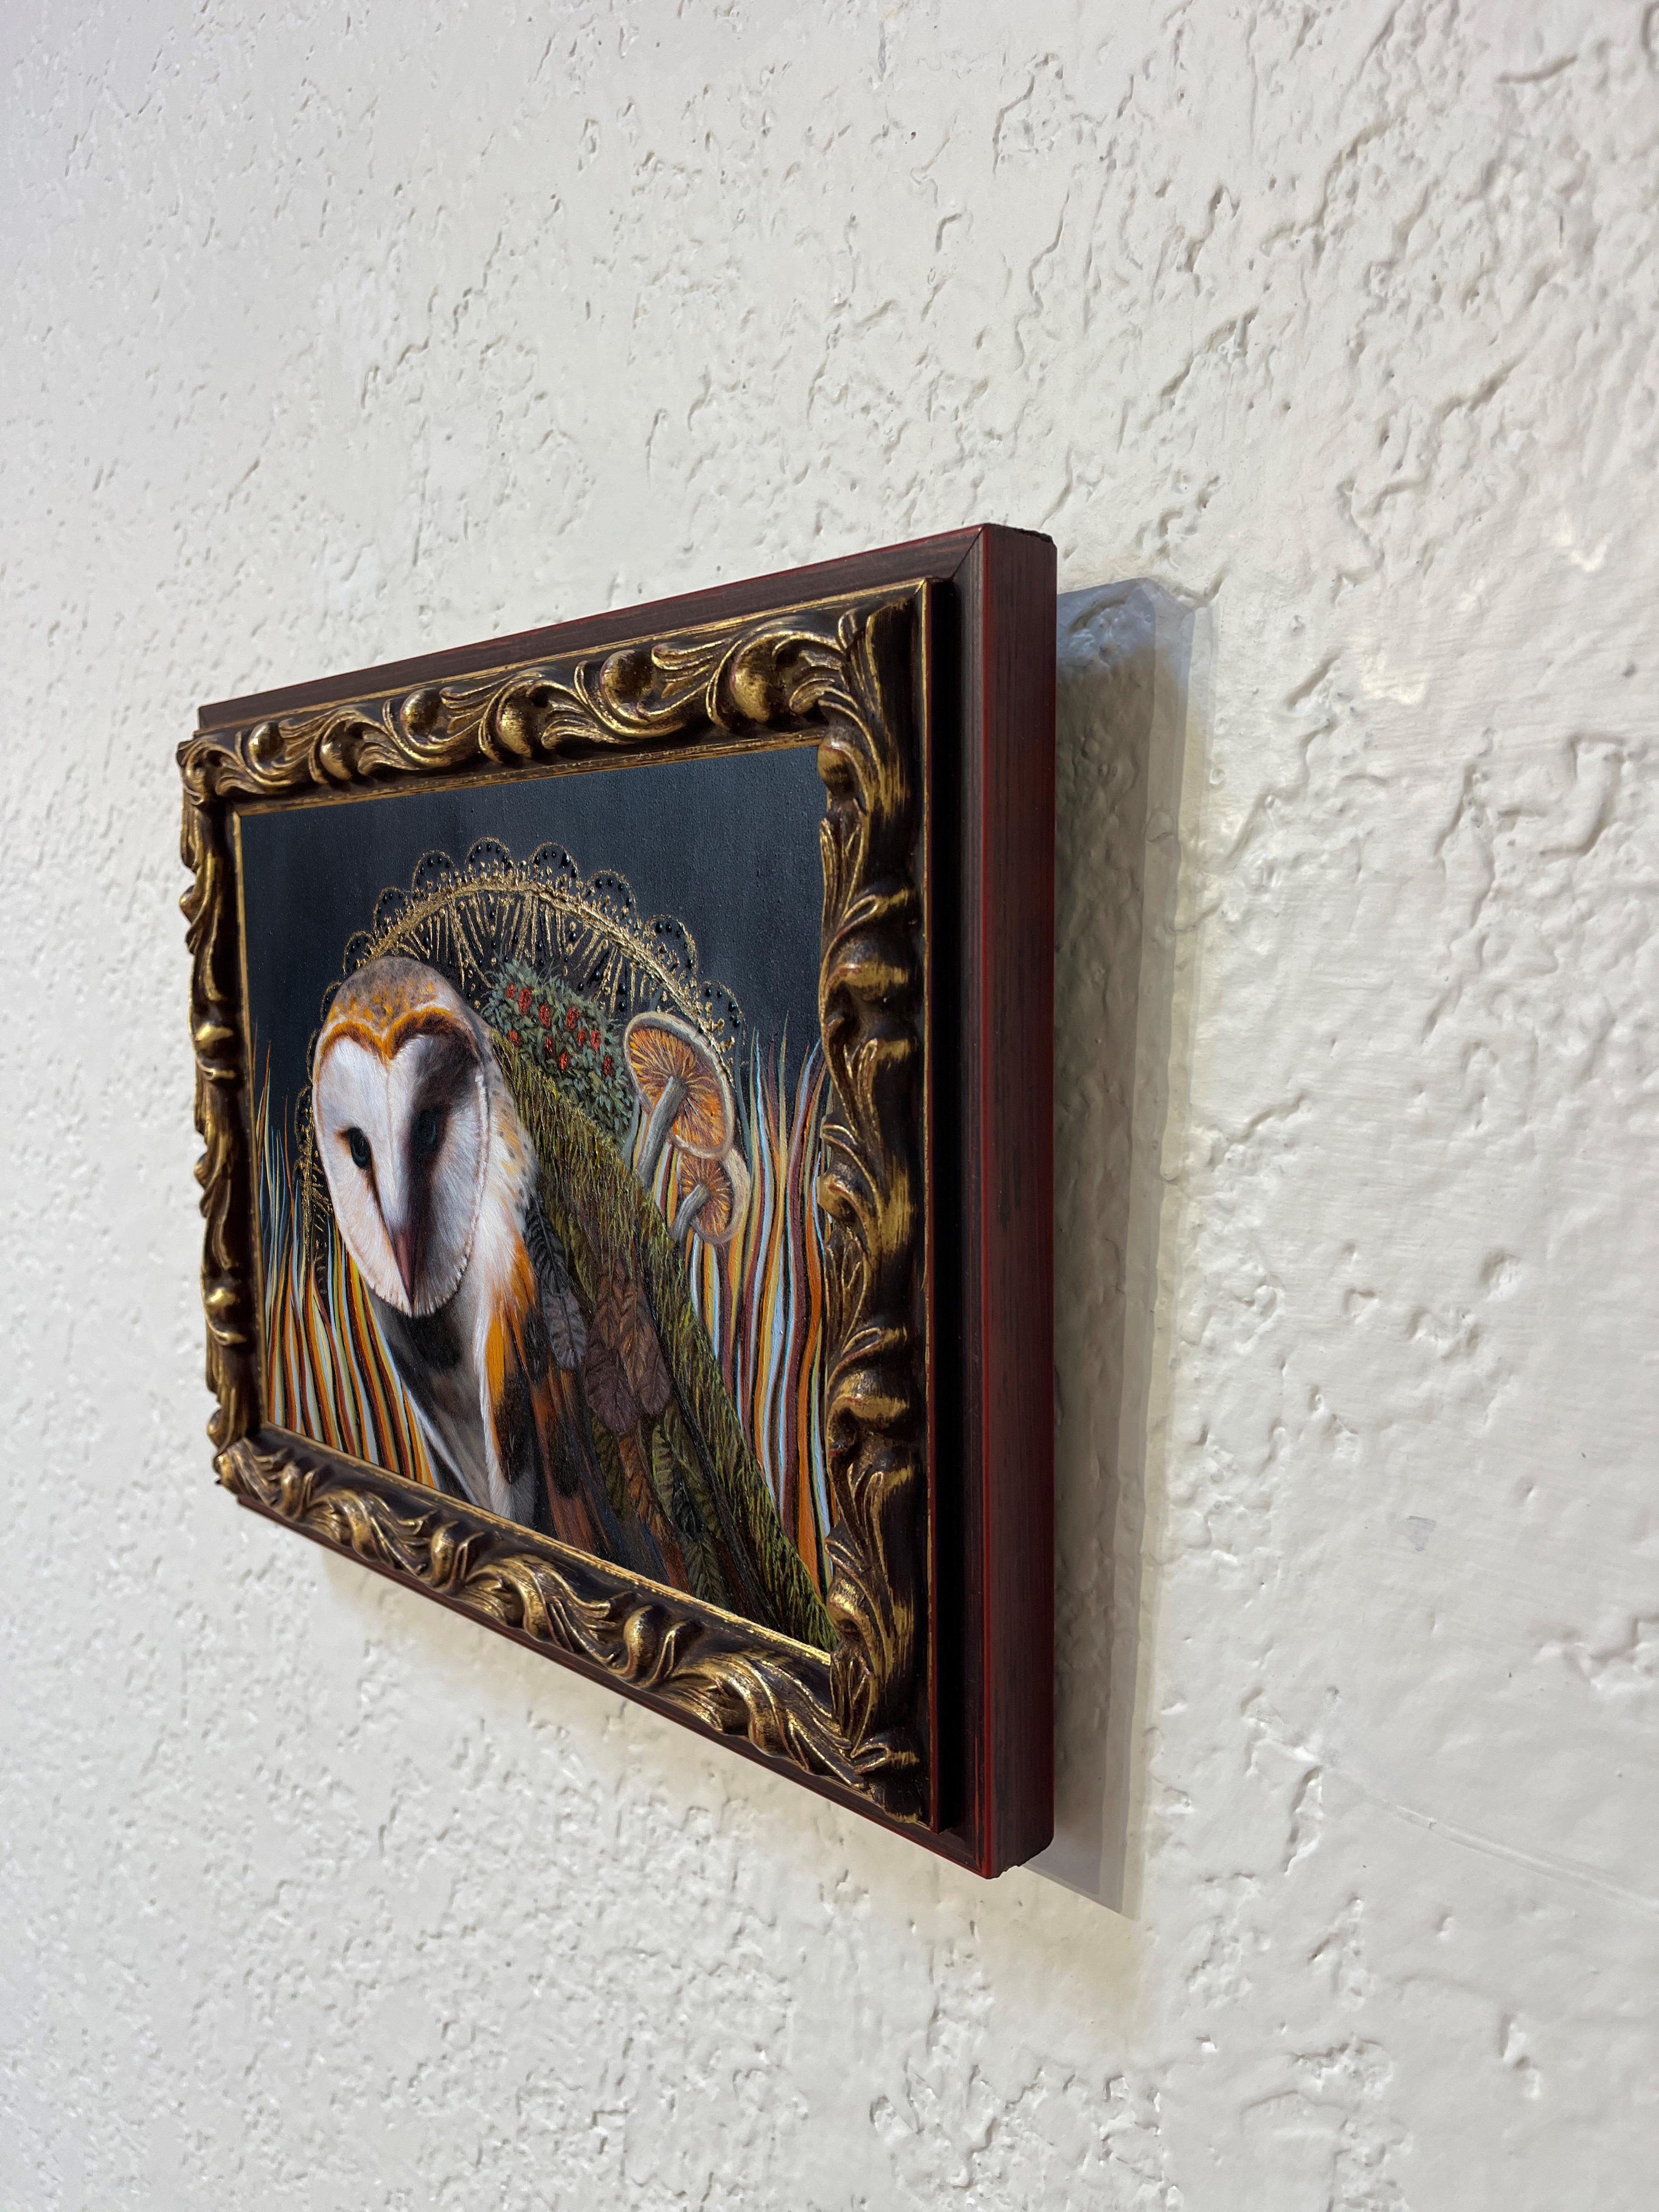 Andrada Trapnell's 'Dream Catcher' Original Owl Oil Painting with Ornate Frame 8